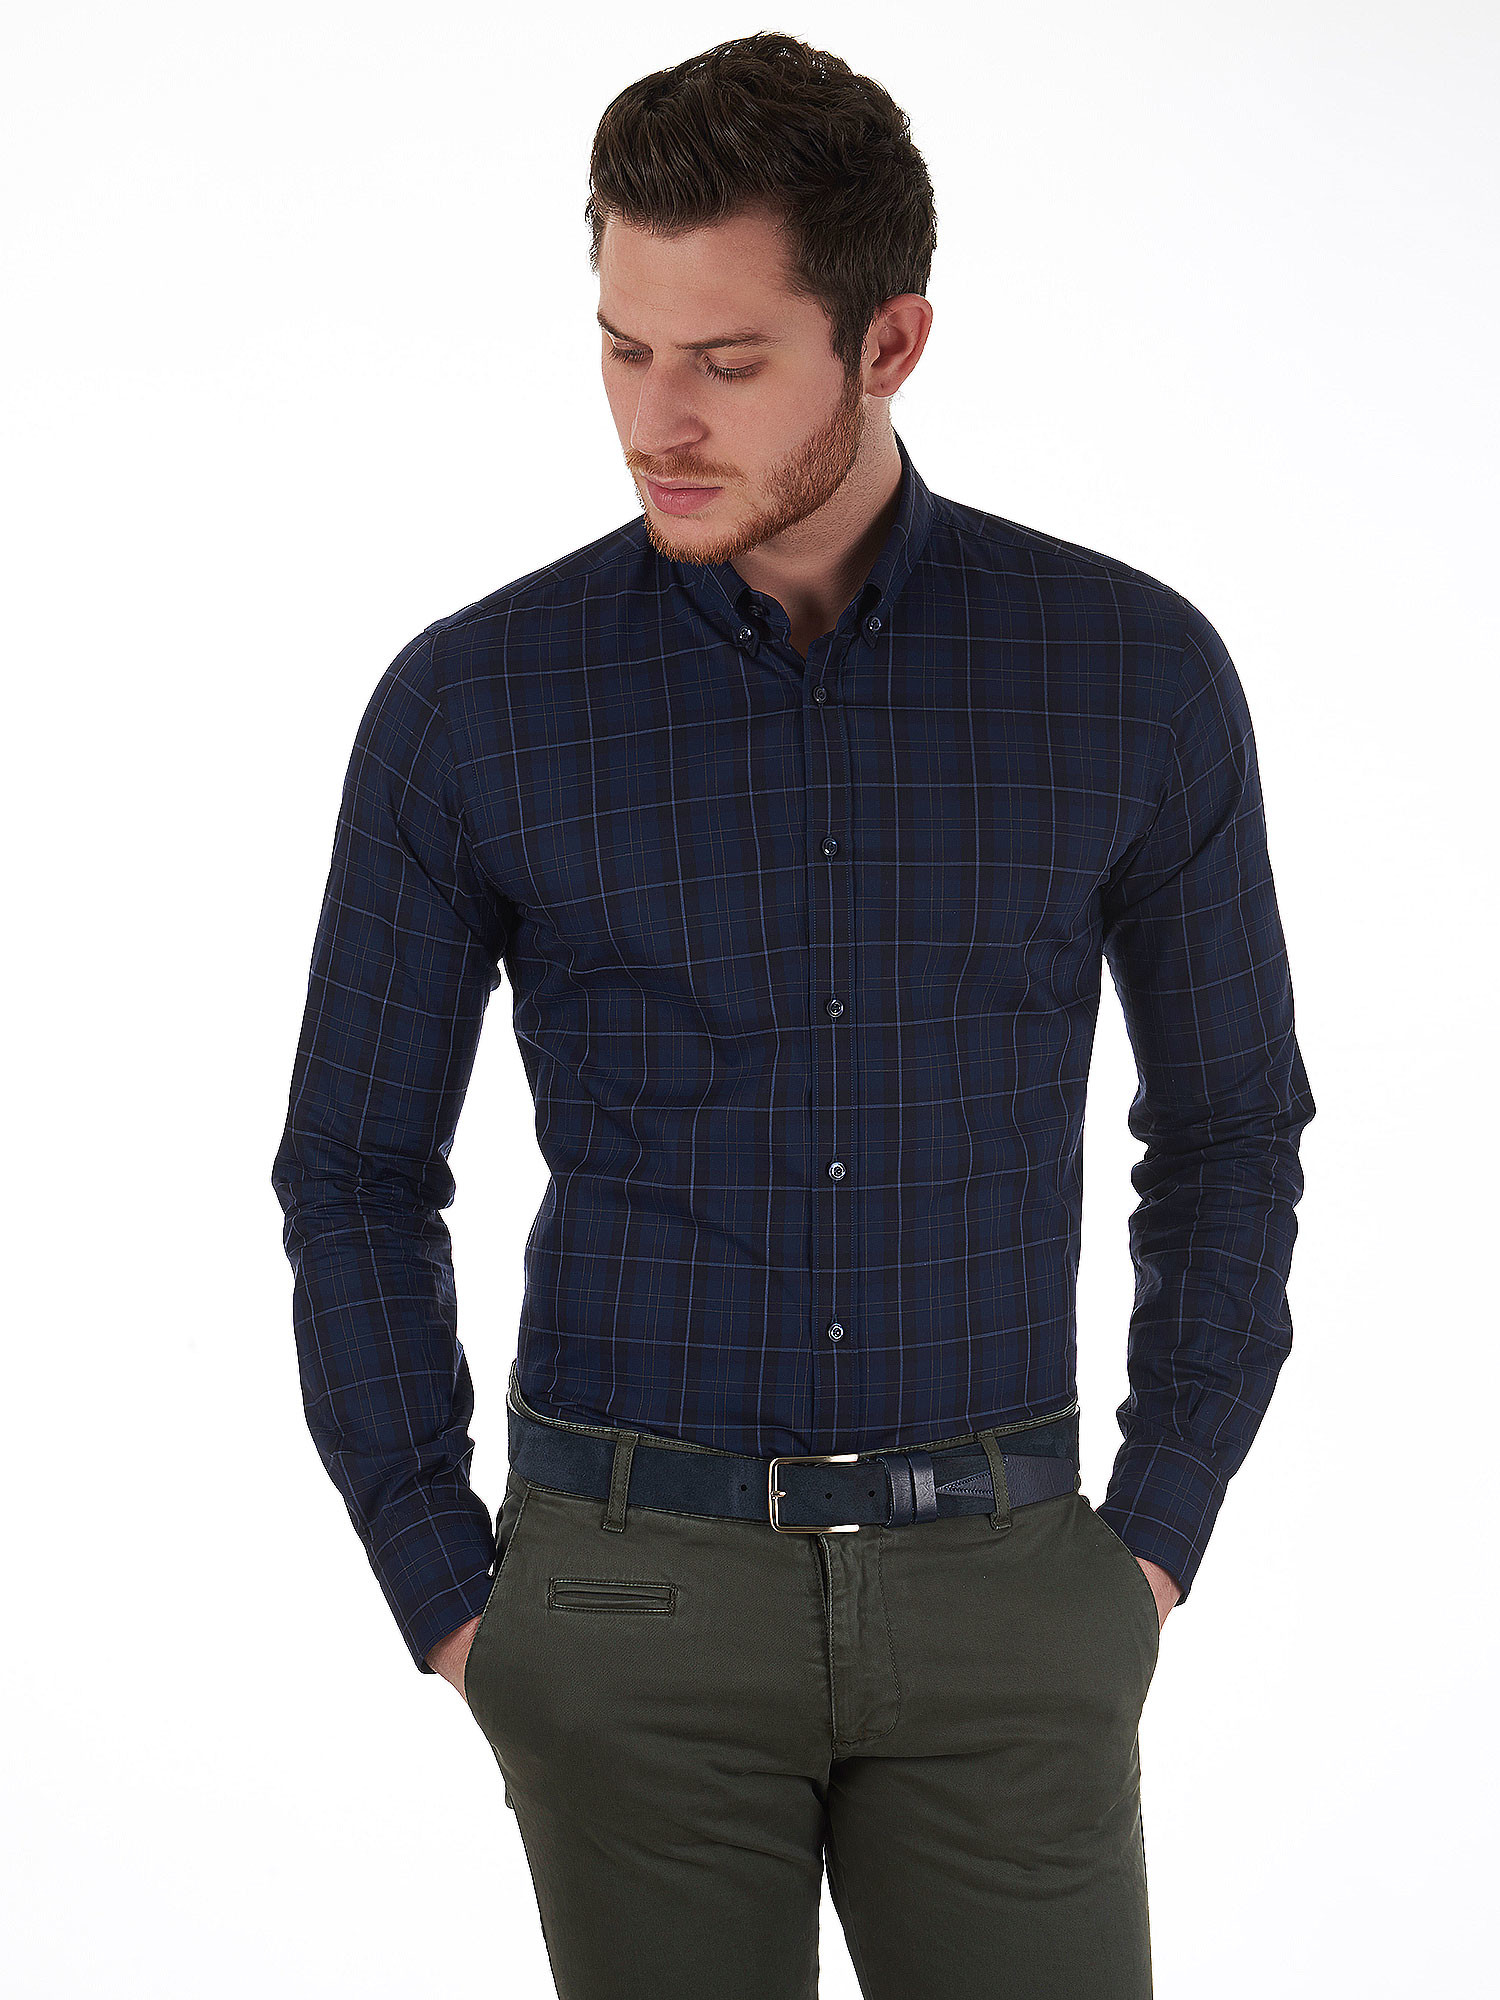 DELSIENA blue checked shirt with a small button-down collar